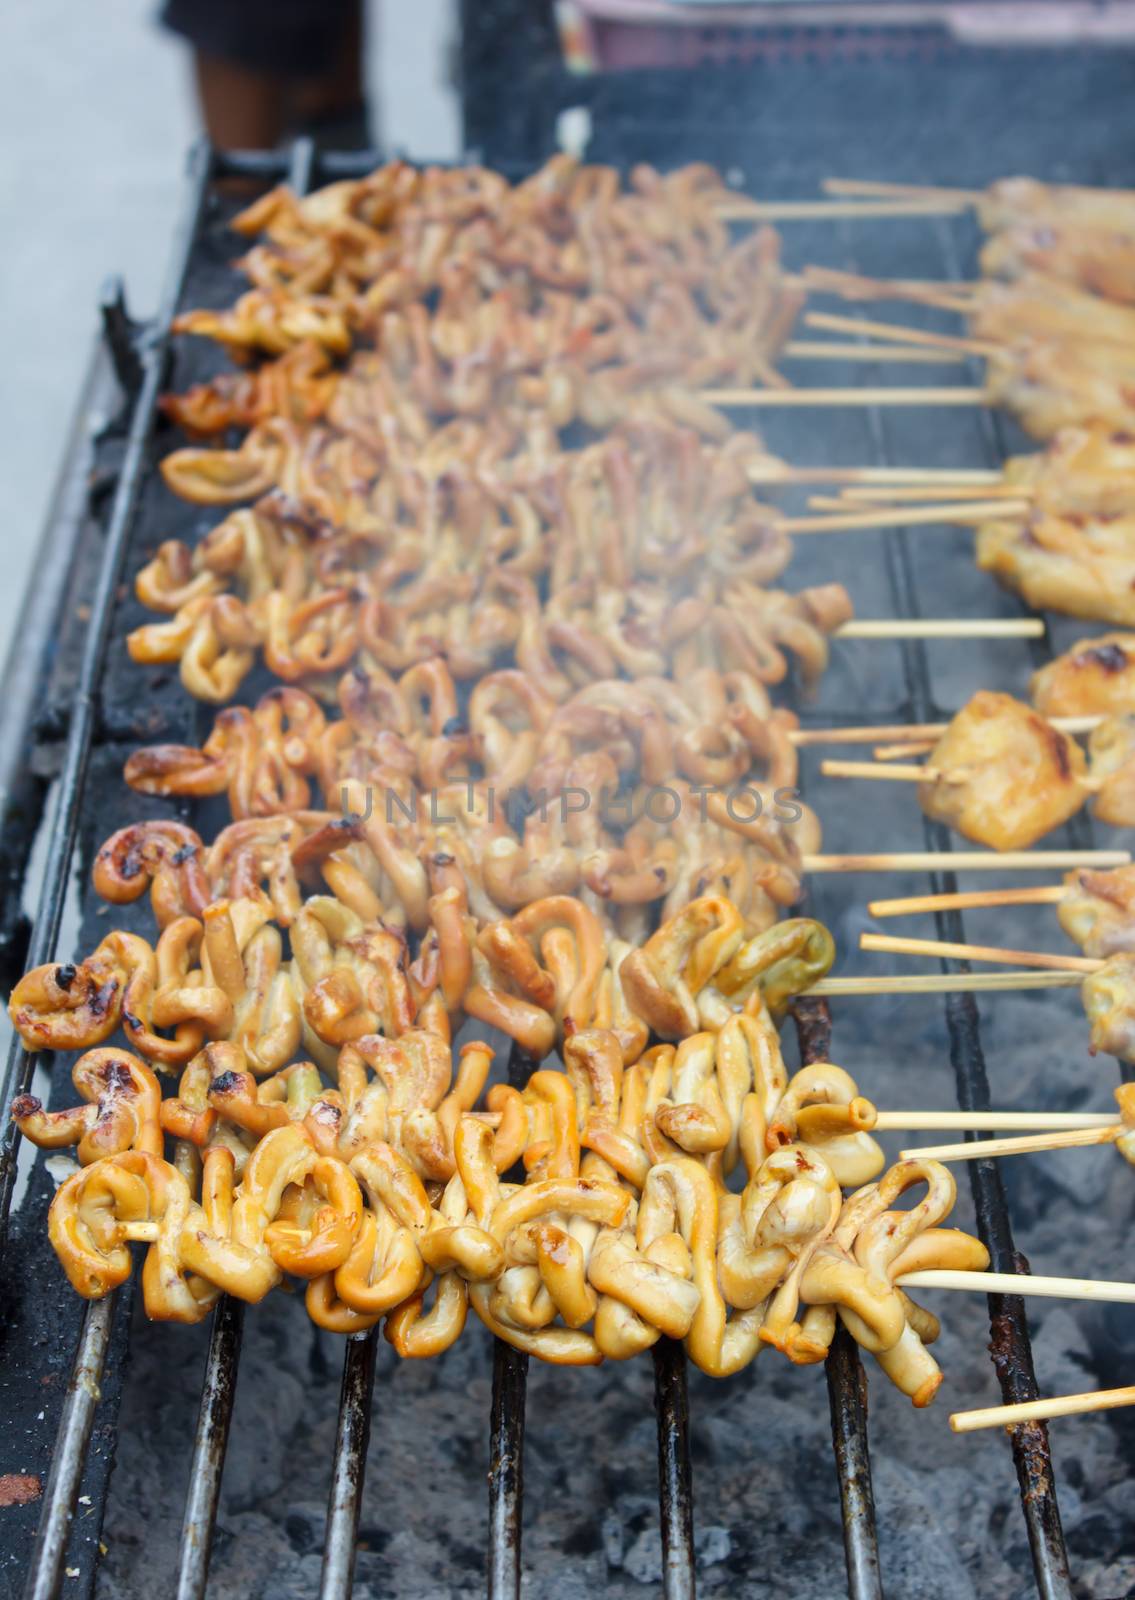 grill chicken intestine on stove (Thai style) by vitawin